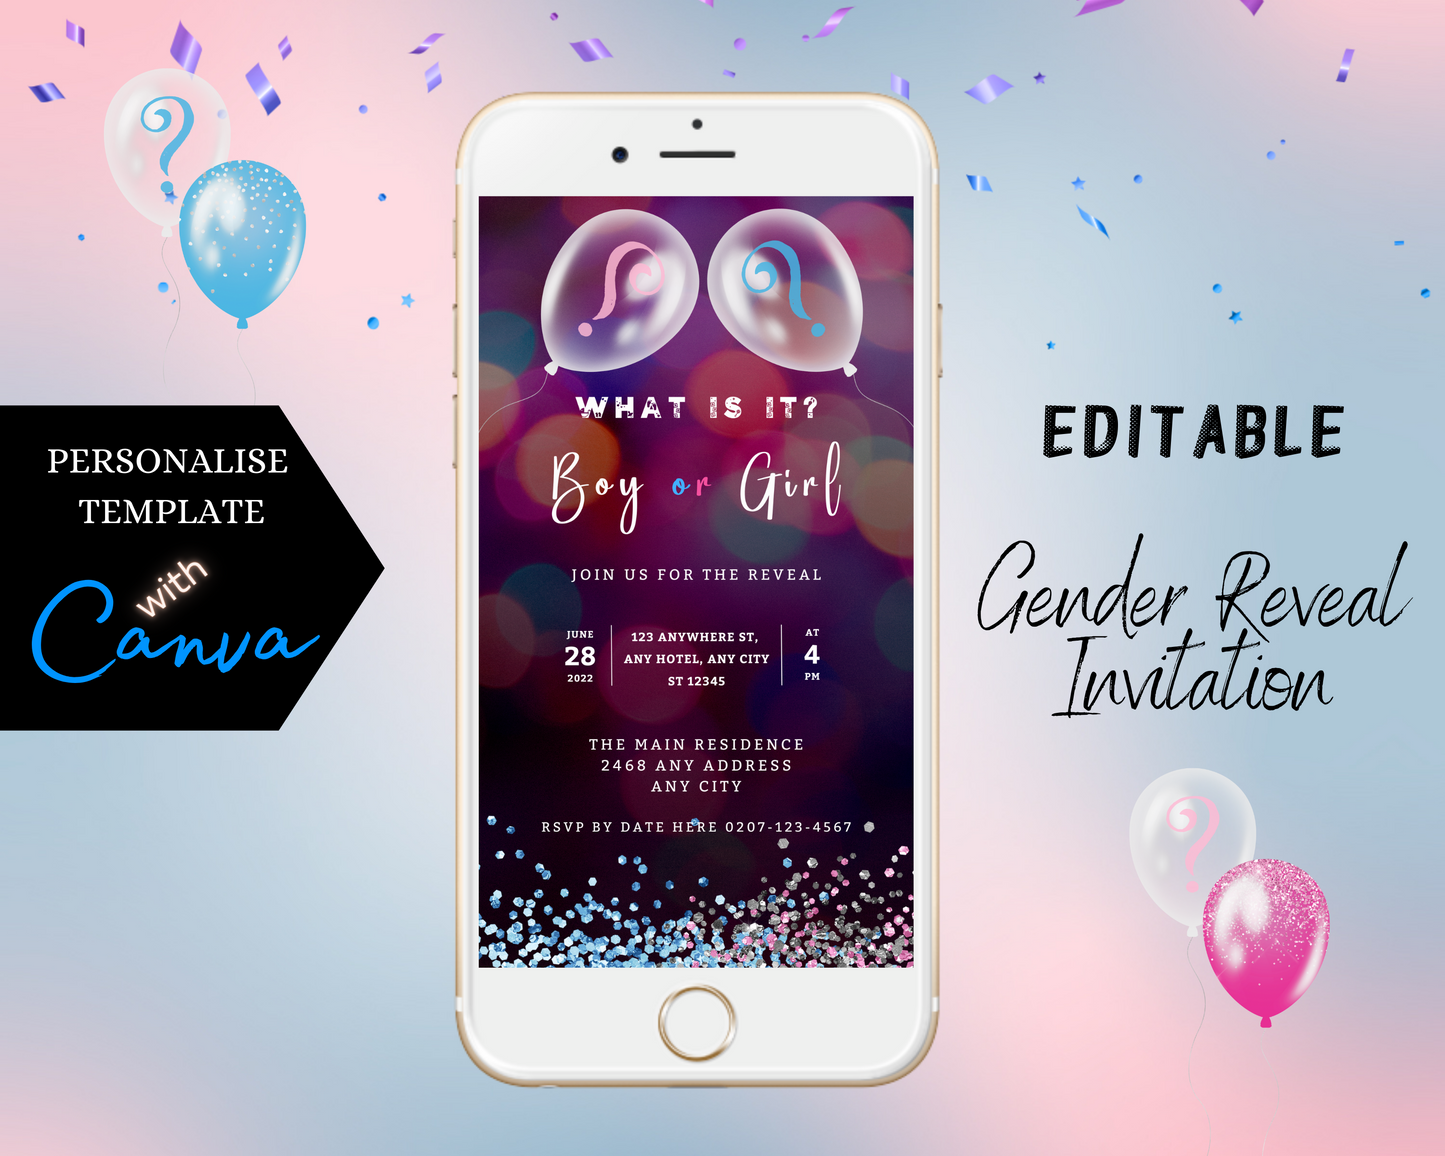 Customizable digital gender reveal invitation on a smartphone screen with balloons and confetti.